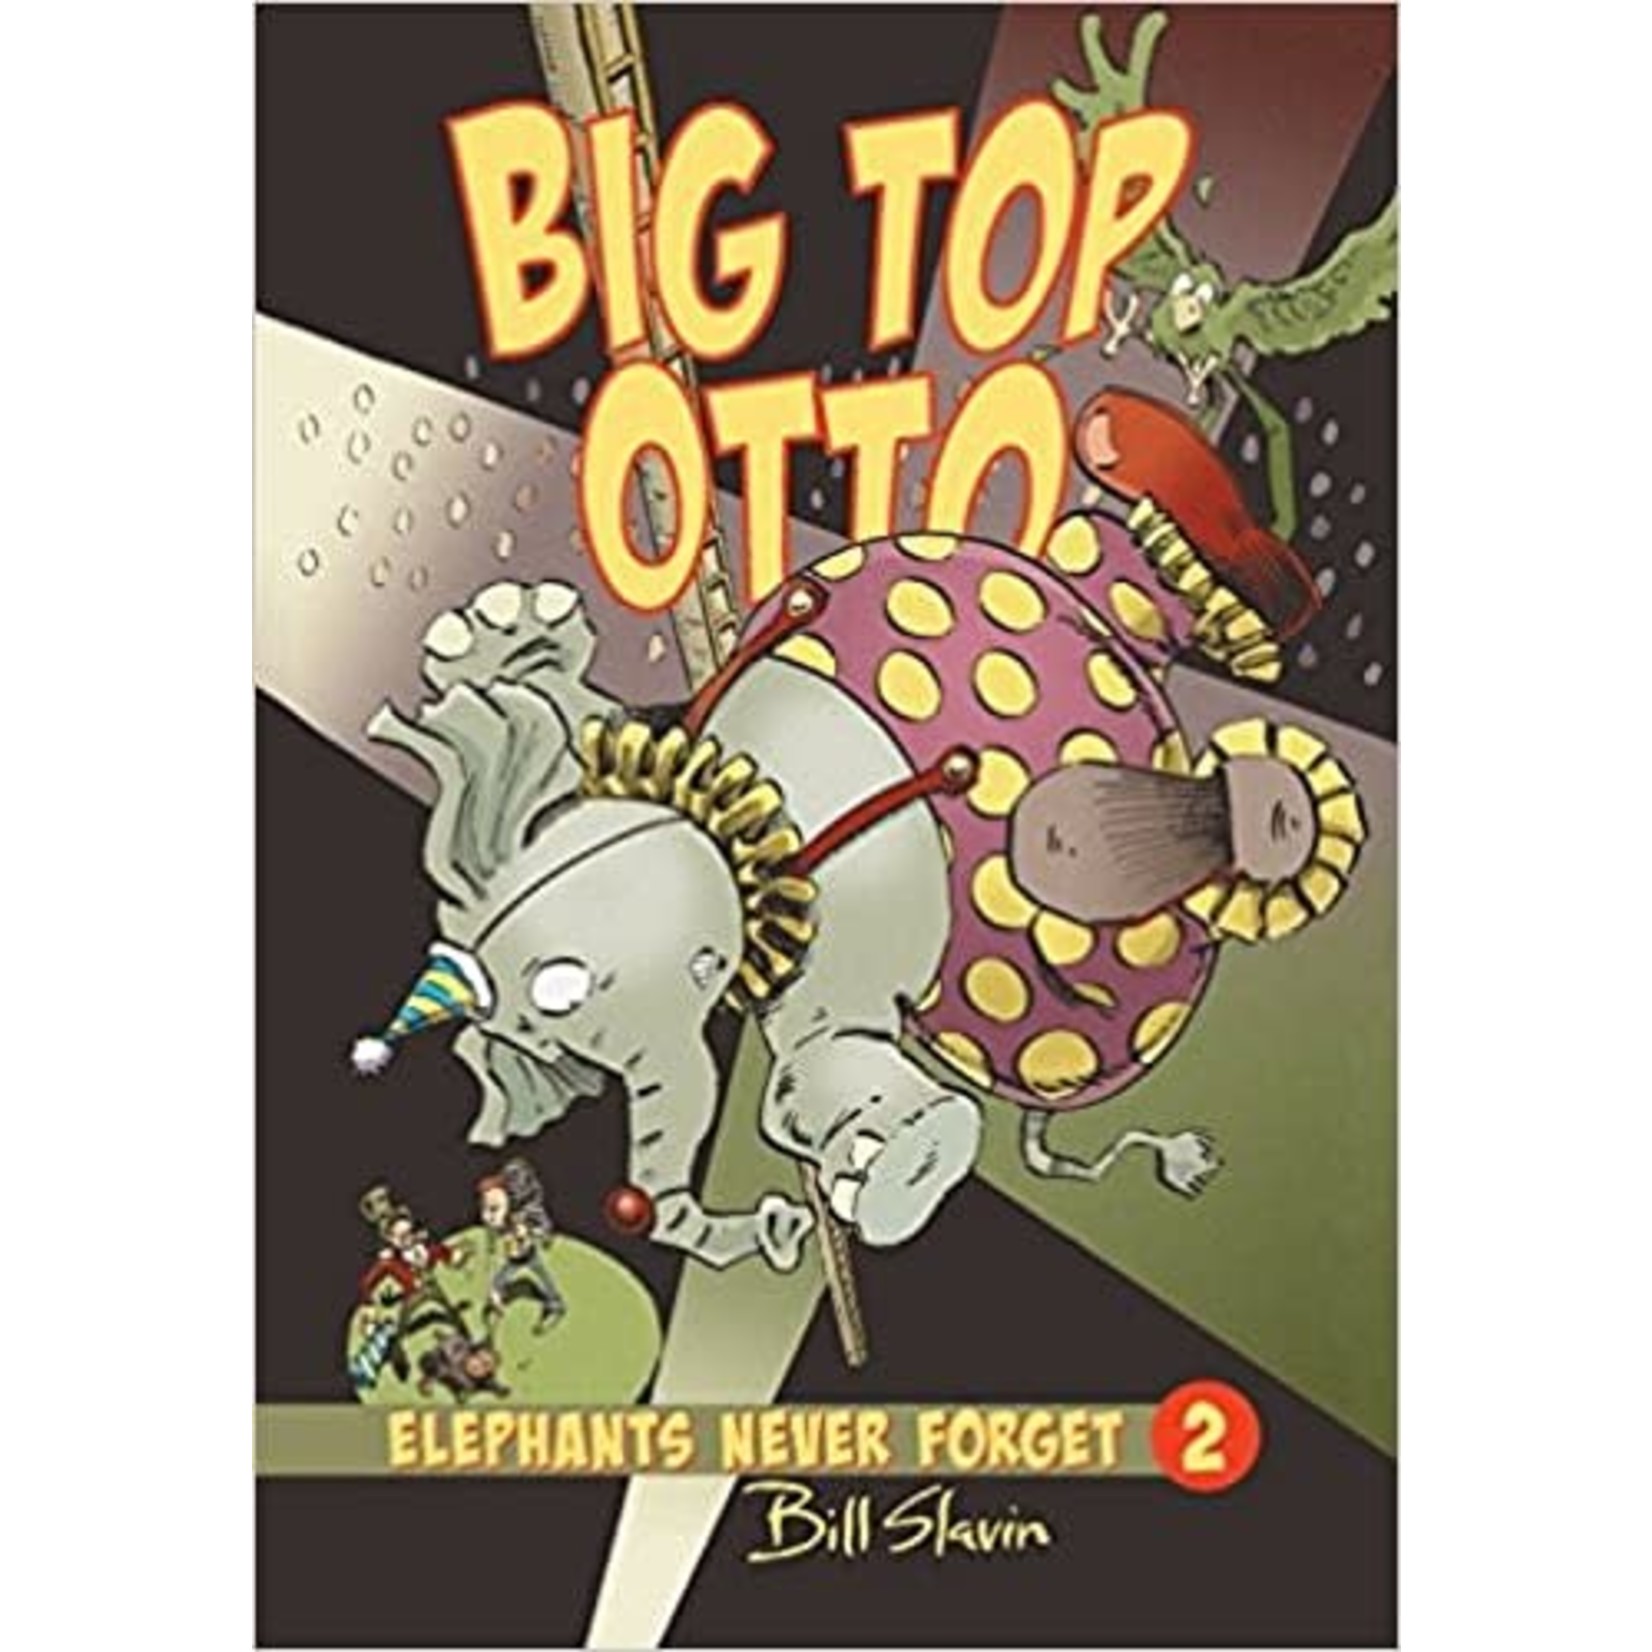 Big Top Otto - Elephants Never Forget (Book #2)